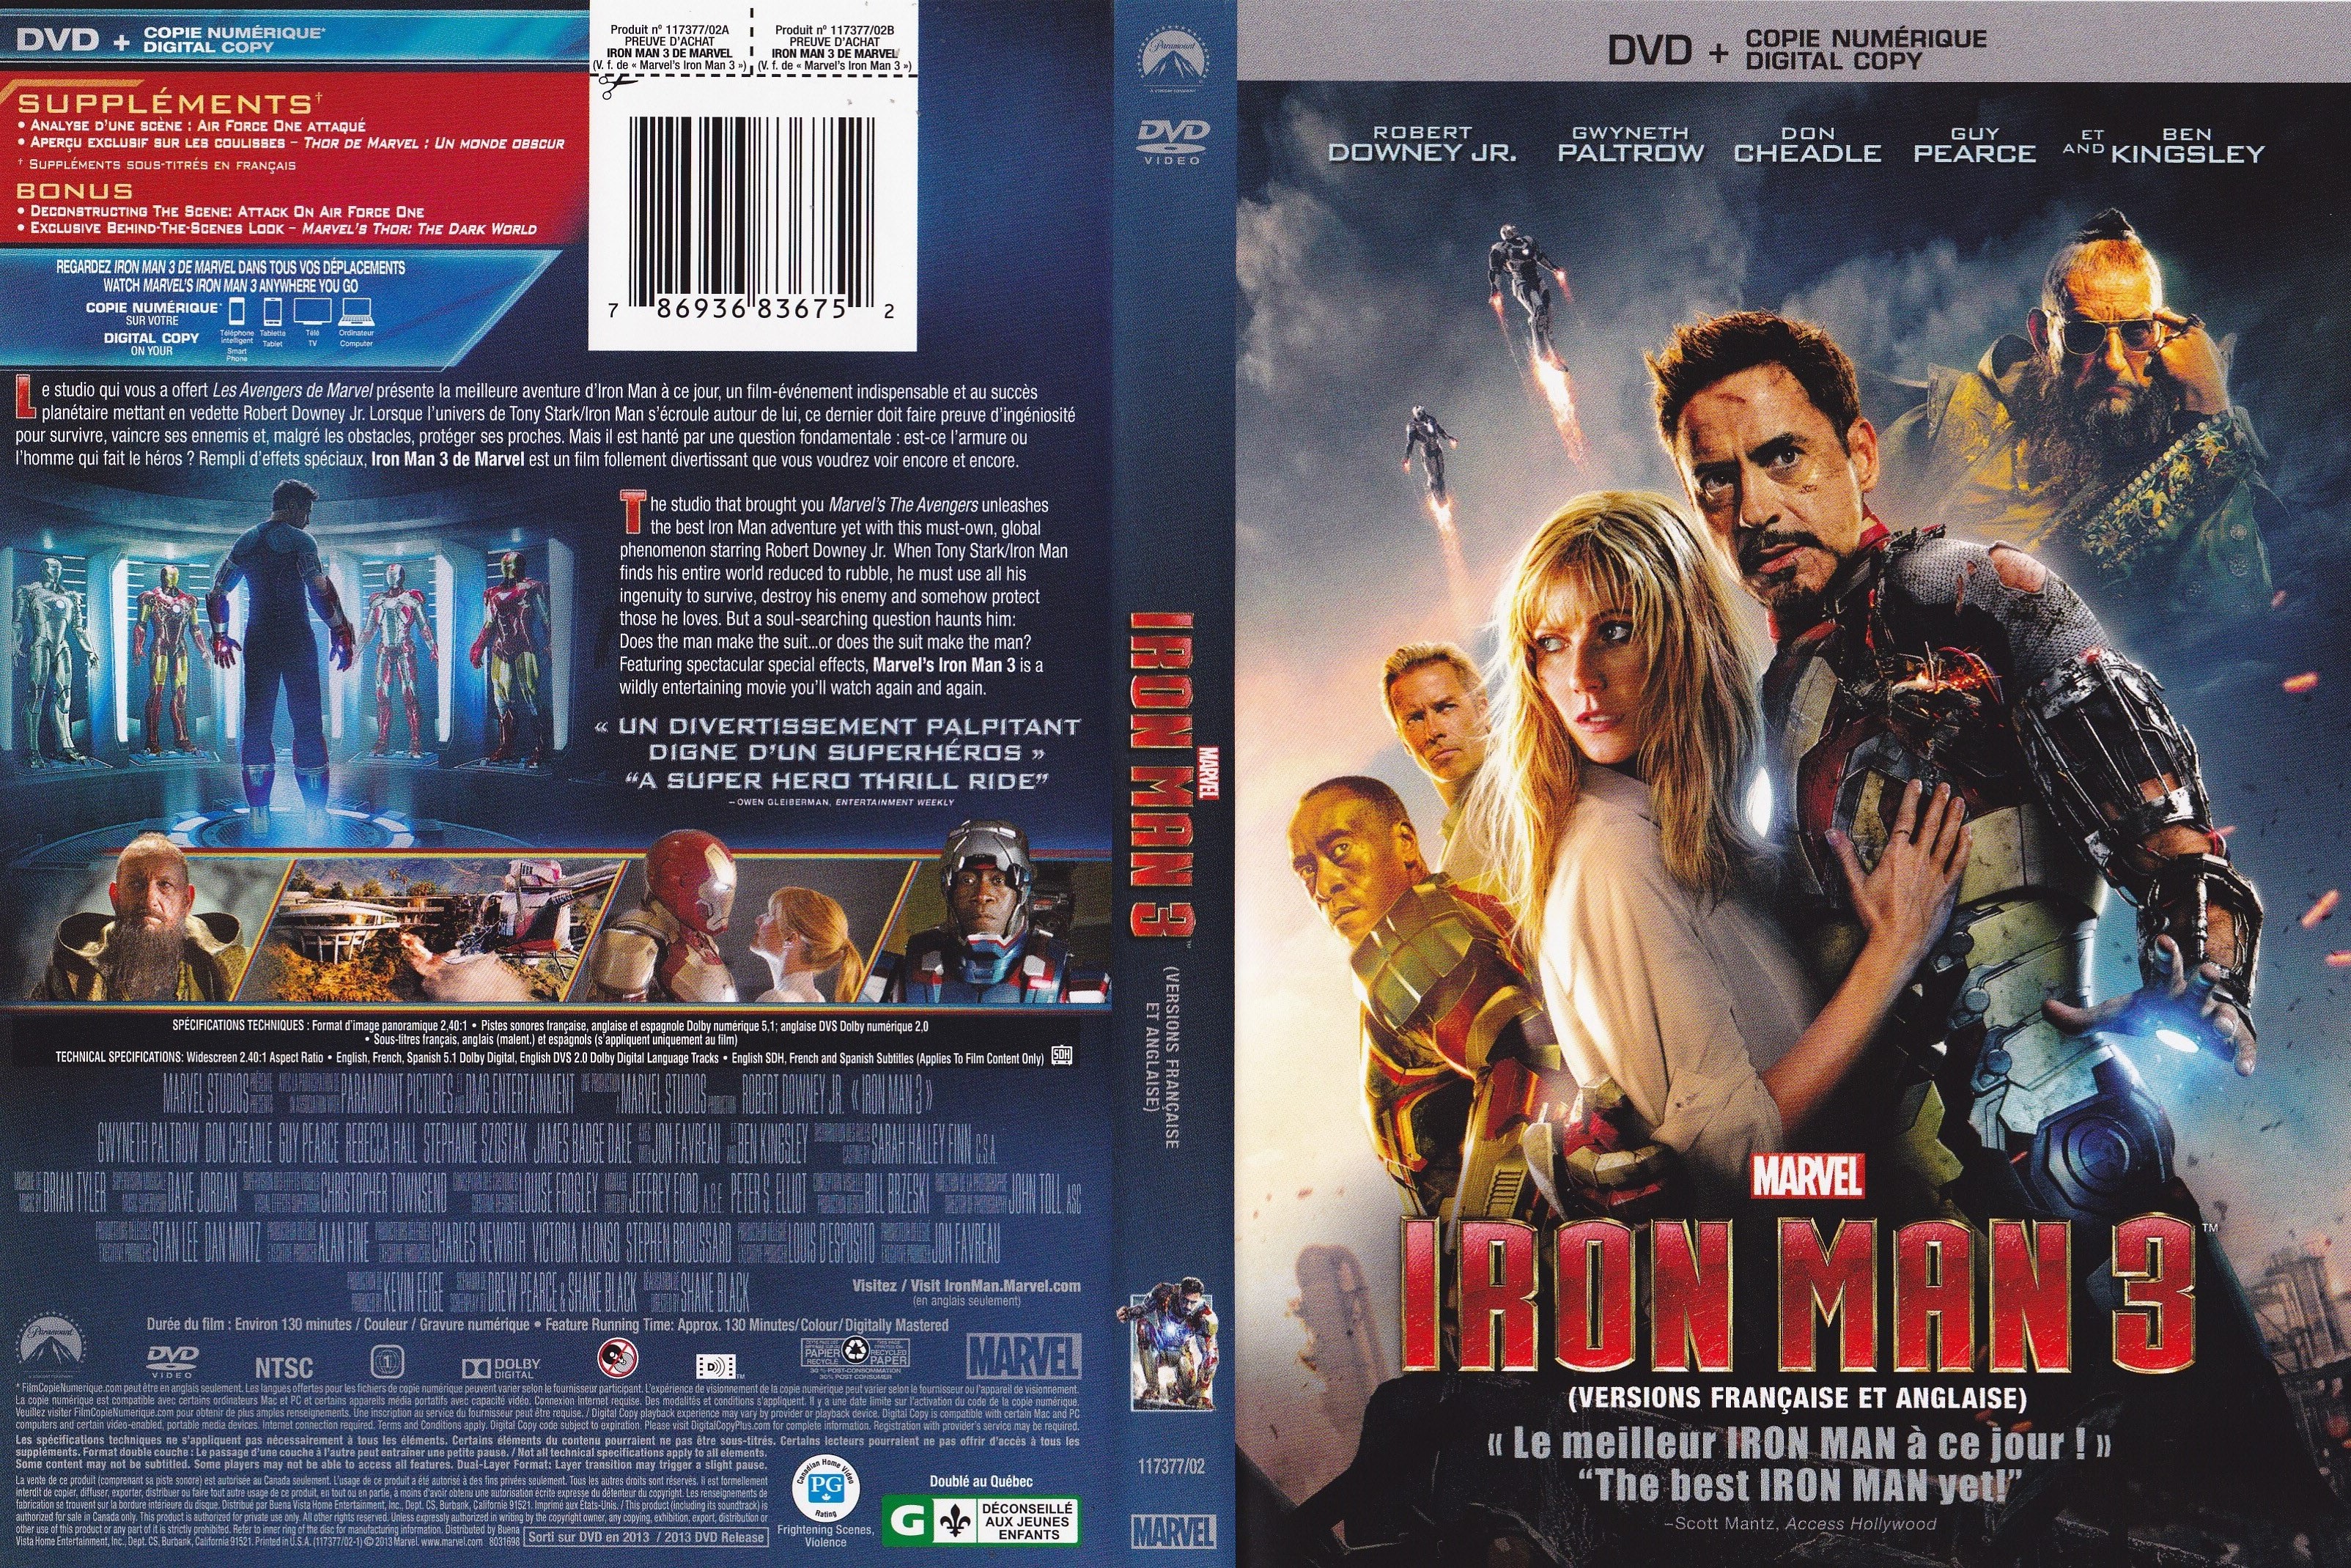 Jaquette DVD Iron man 3 (Canadienne)